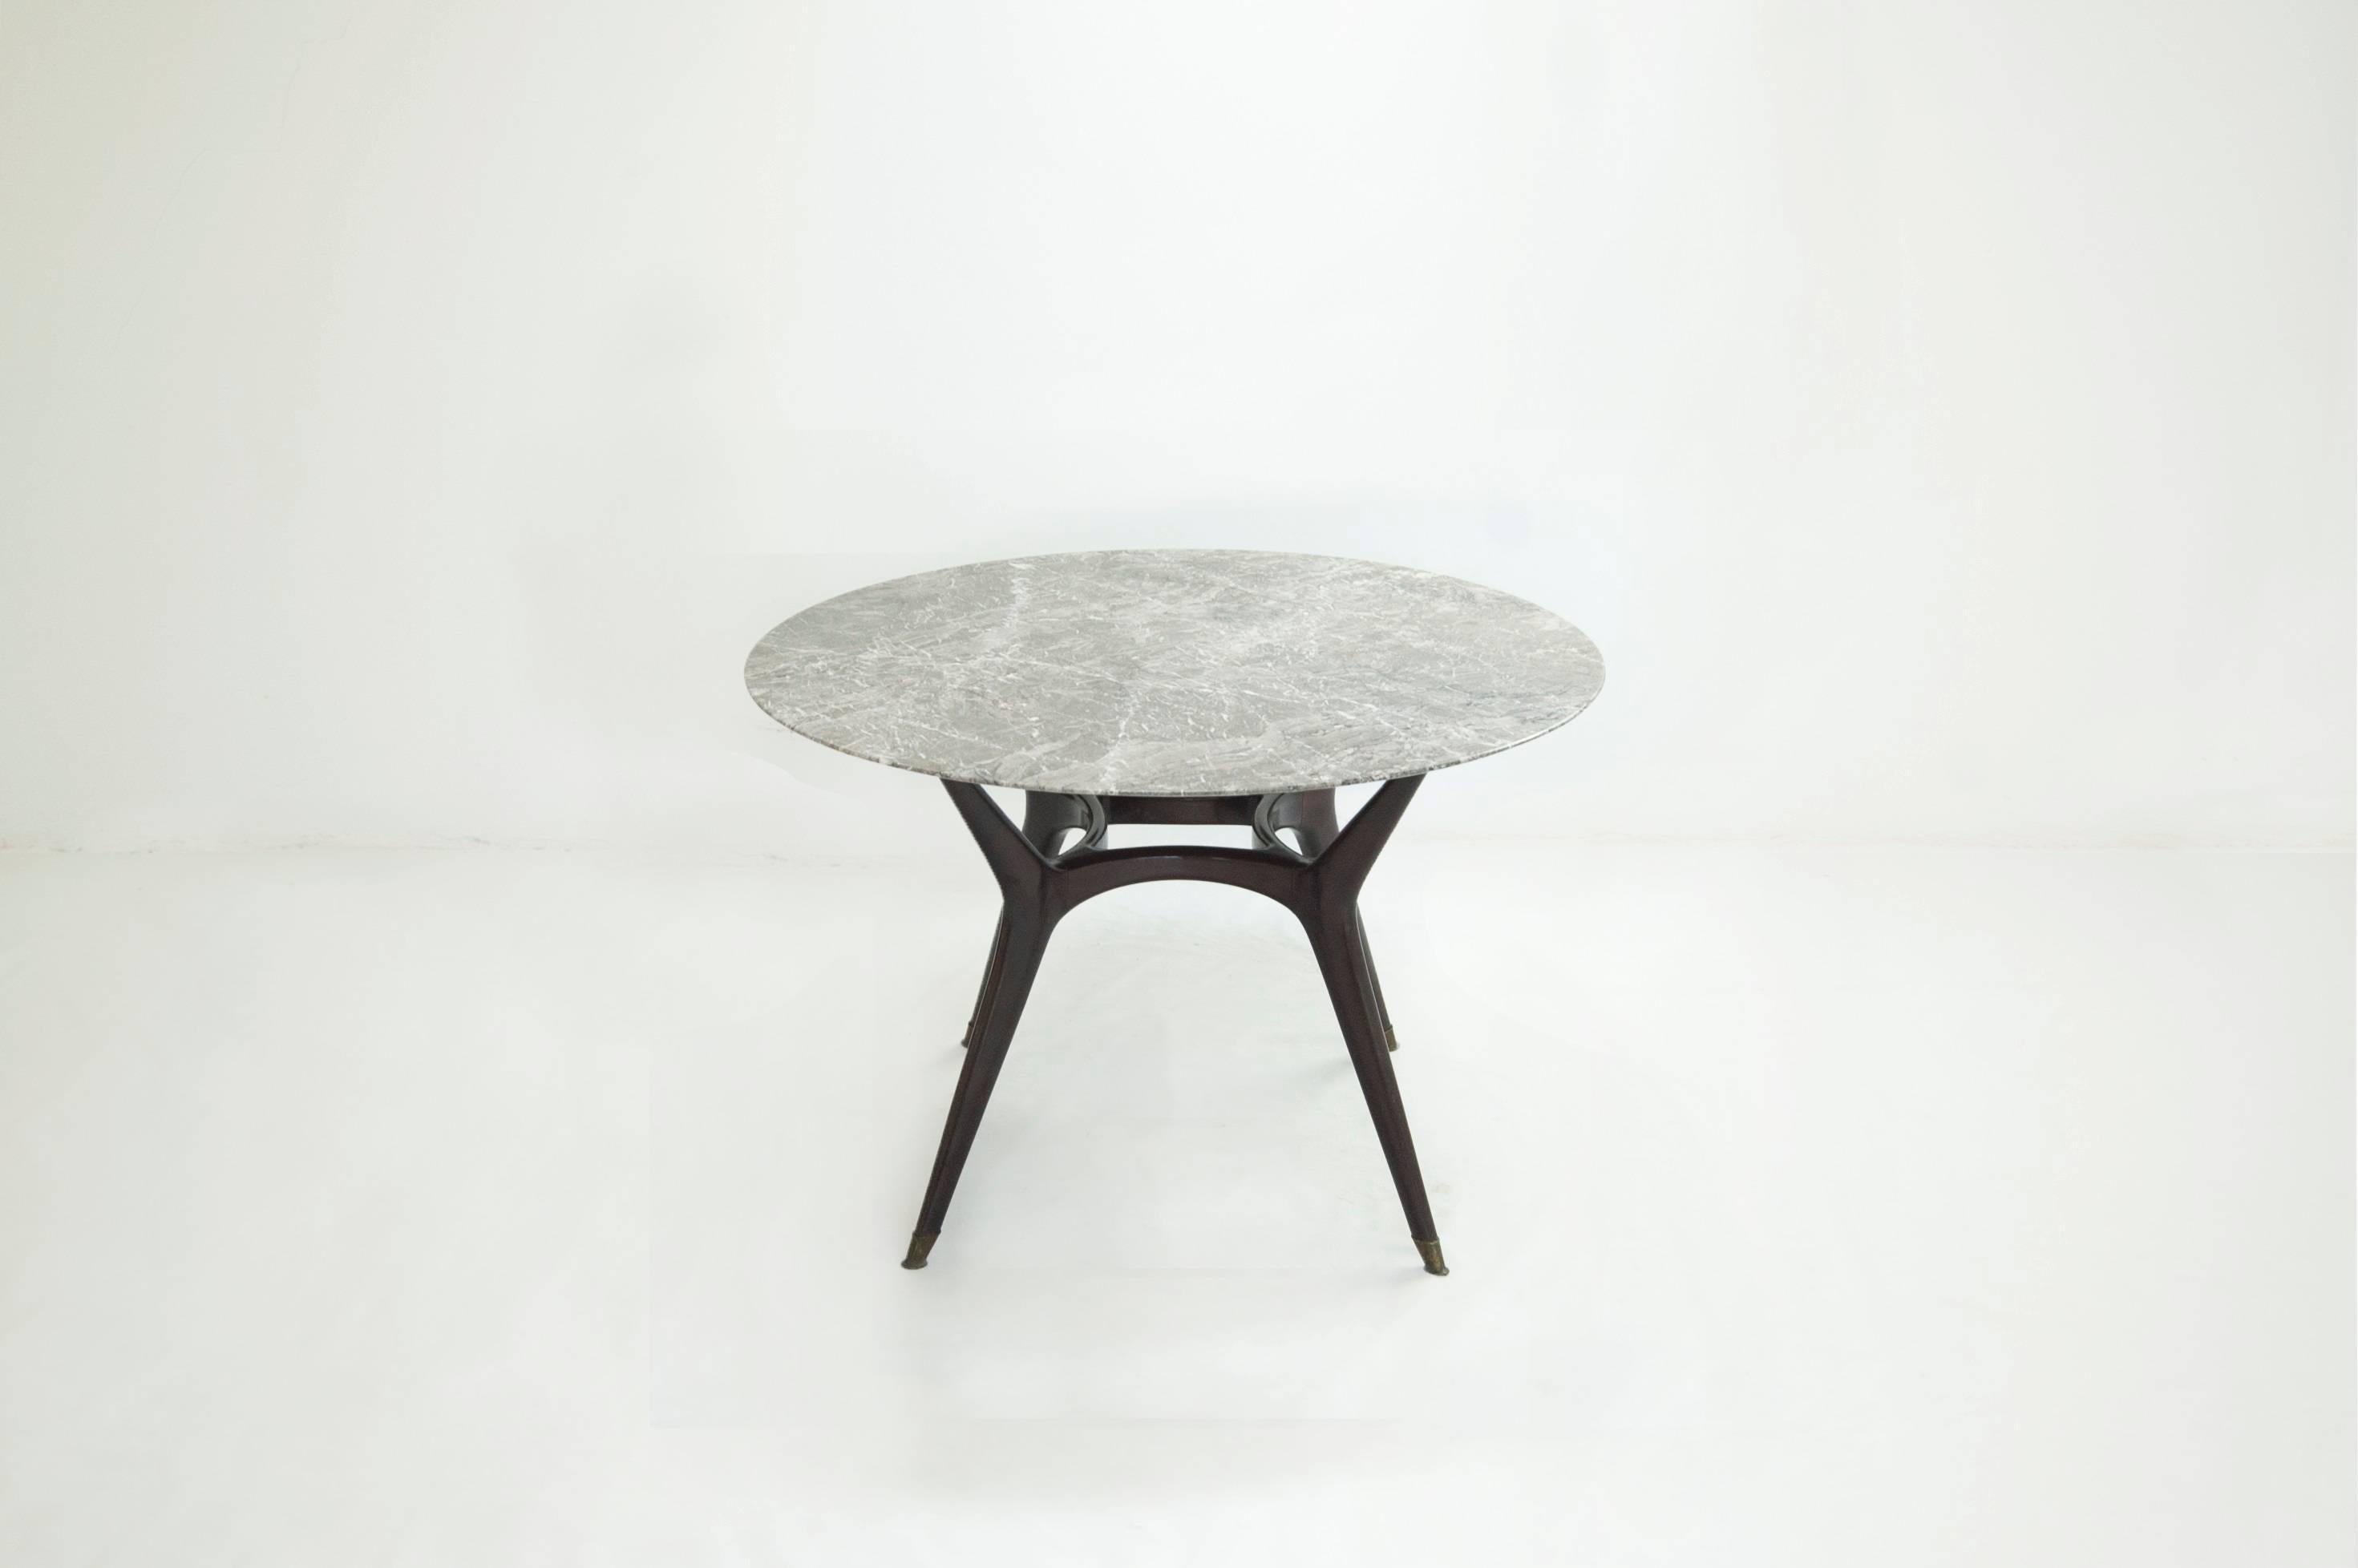 20th Century Italian Marble and wood Circular Dining Table
Unknown designer 
Mid-century Modern dining table 

43 Inches x 43 inches x 29 (H) Inches 